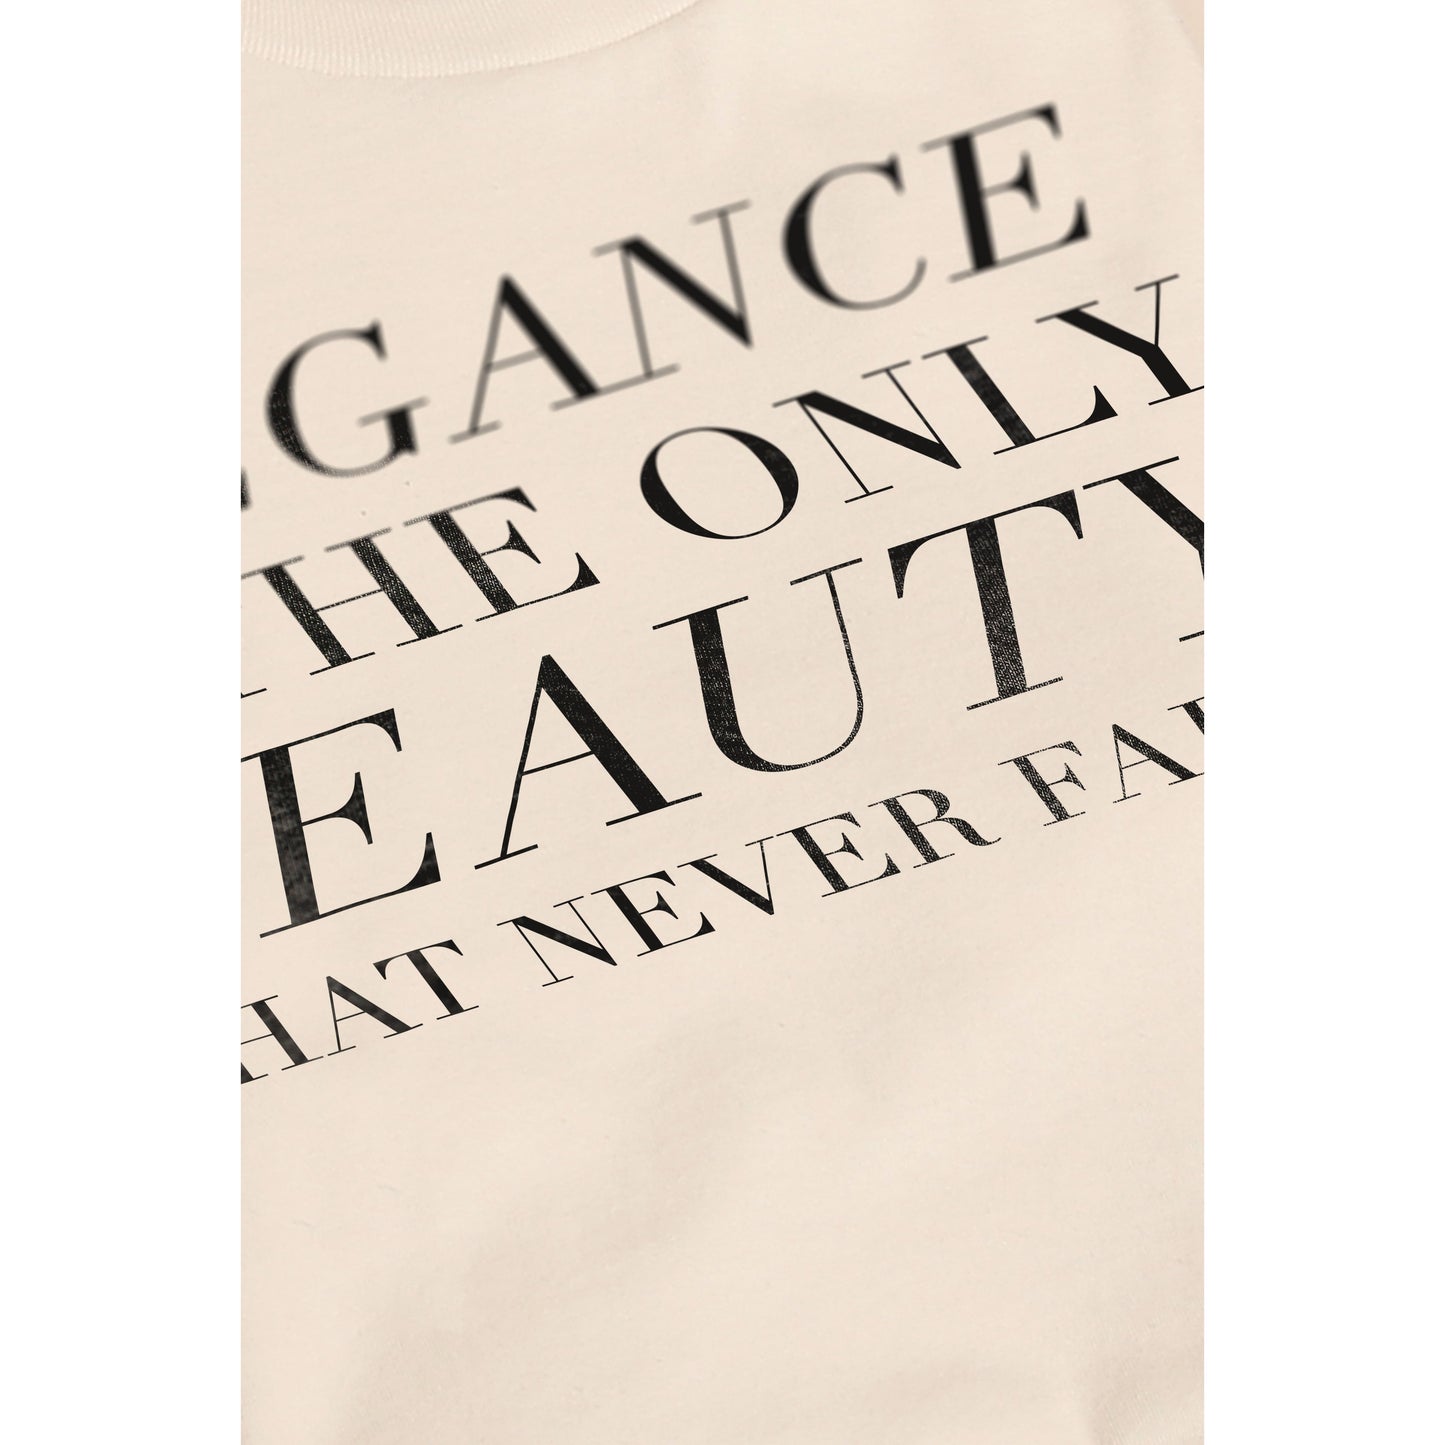 Elegance Is The only Beauty That Never Fades - Stories You Can Wear by Thread Tank